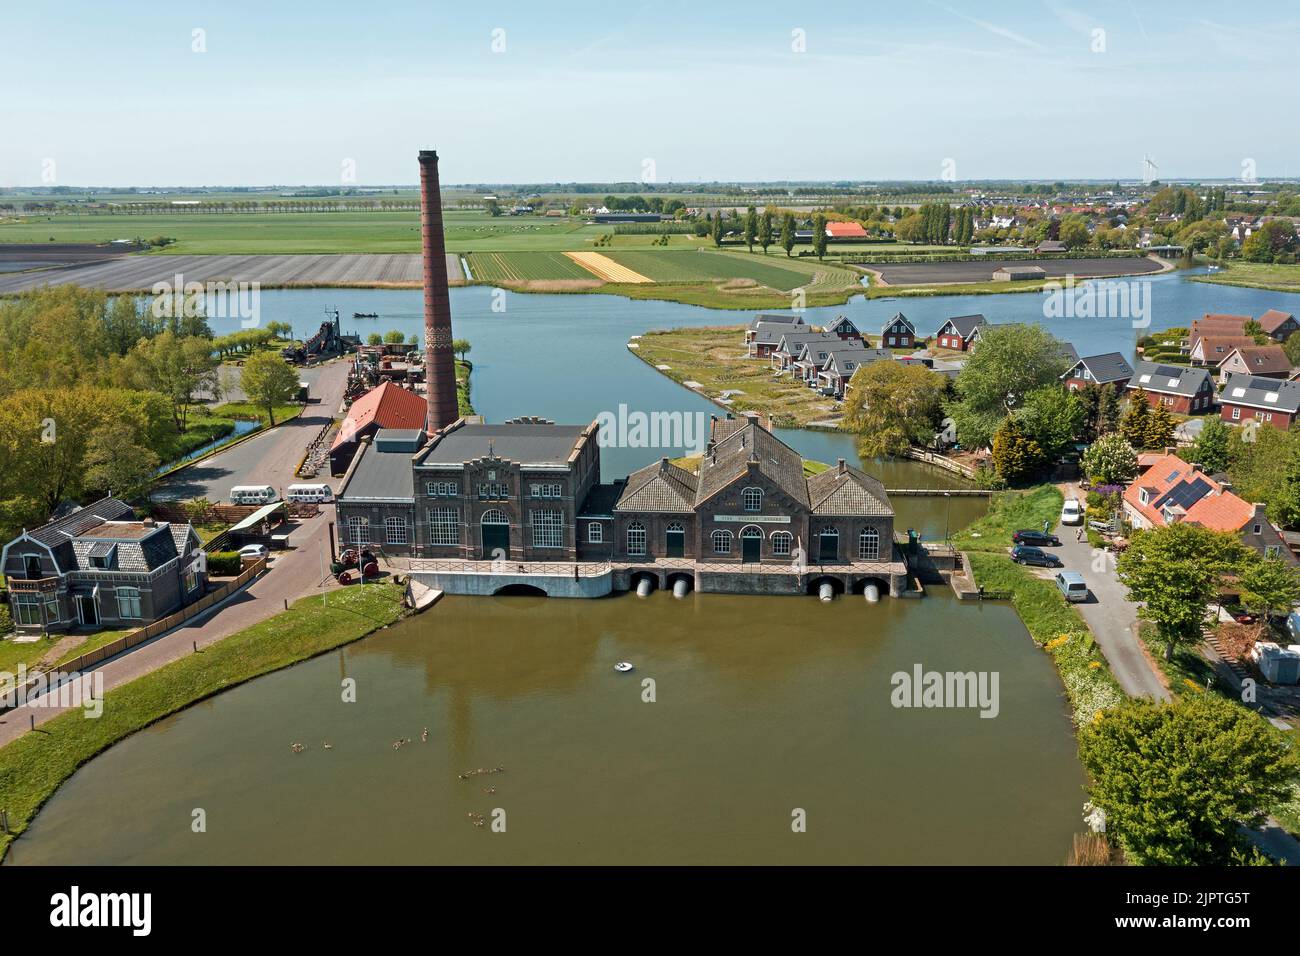 Aerial from the steam pumping station Vier Noorder Koggen in Wervershoof in the Netherlands Stock Photo